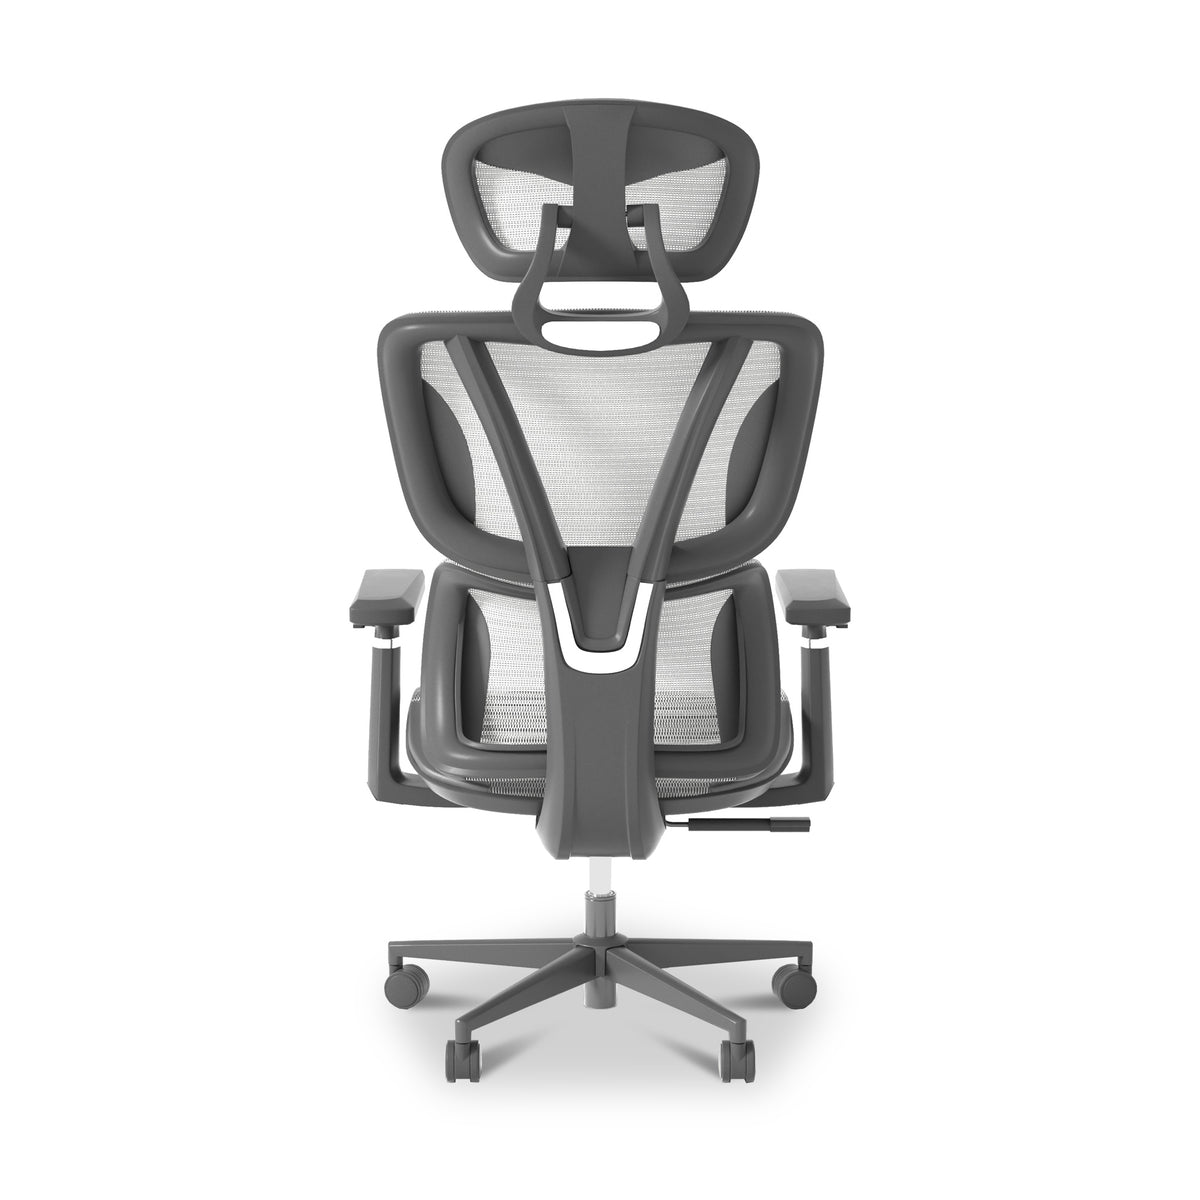 Koble Avalanche Black Gaming Chair